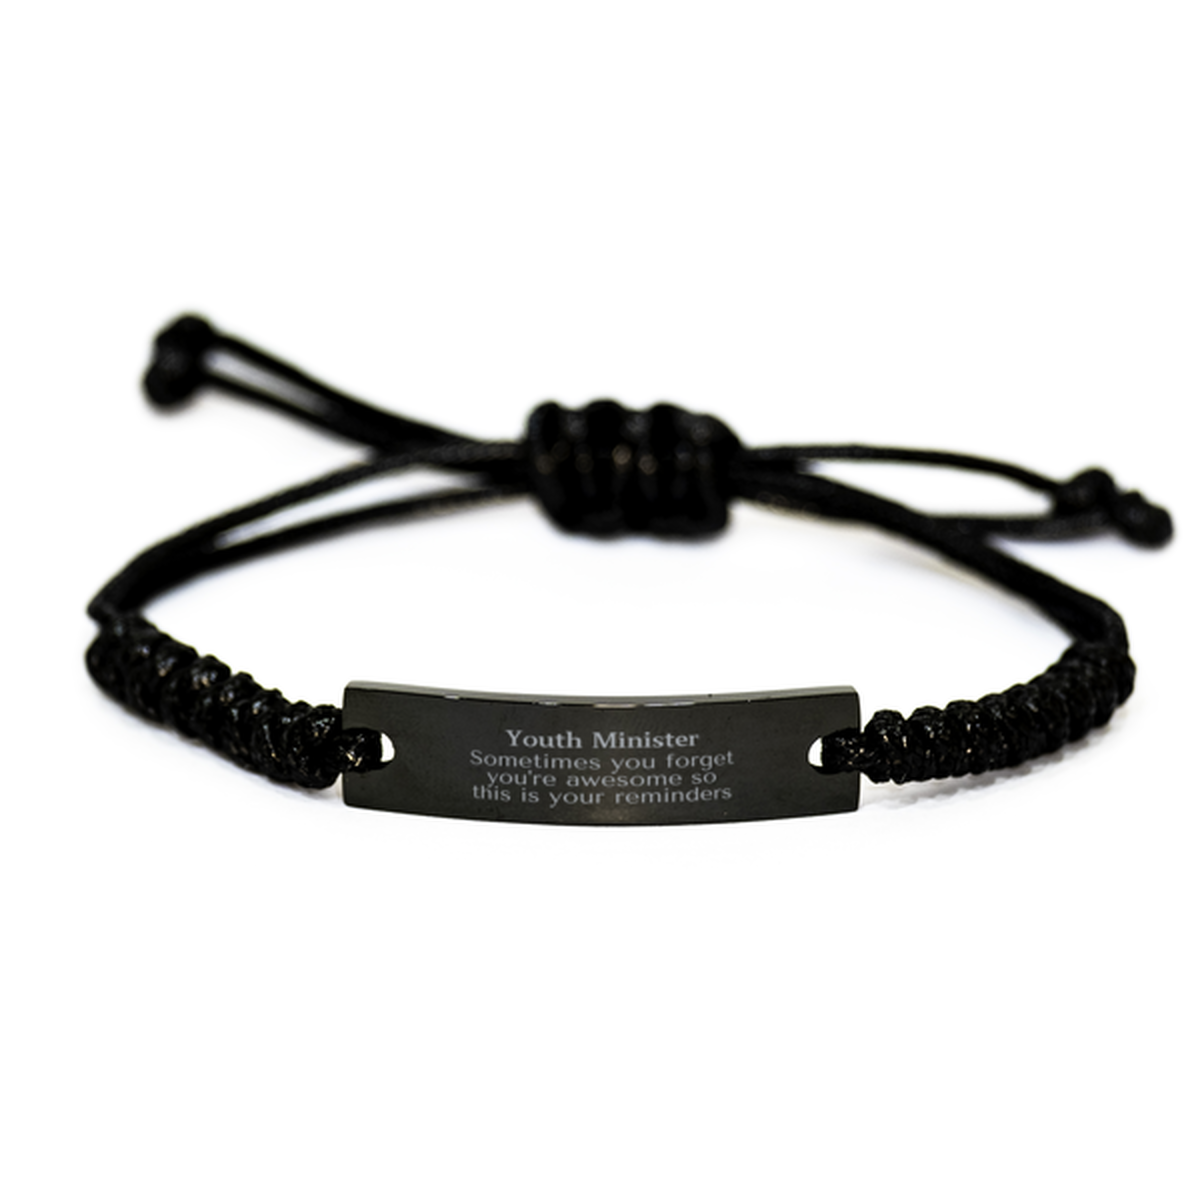 Sentimental Youth Minister Black Rope Bracelet, Youth Minister Sometimes you forget you're awesome so this is your reminders, Graduation Christmas Birthday Gifts for Youth Minister, Men, Women, Coworkers